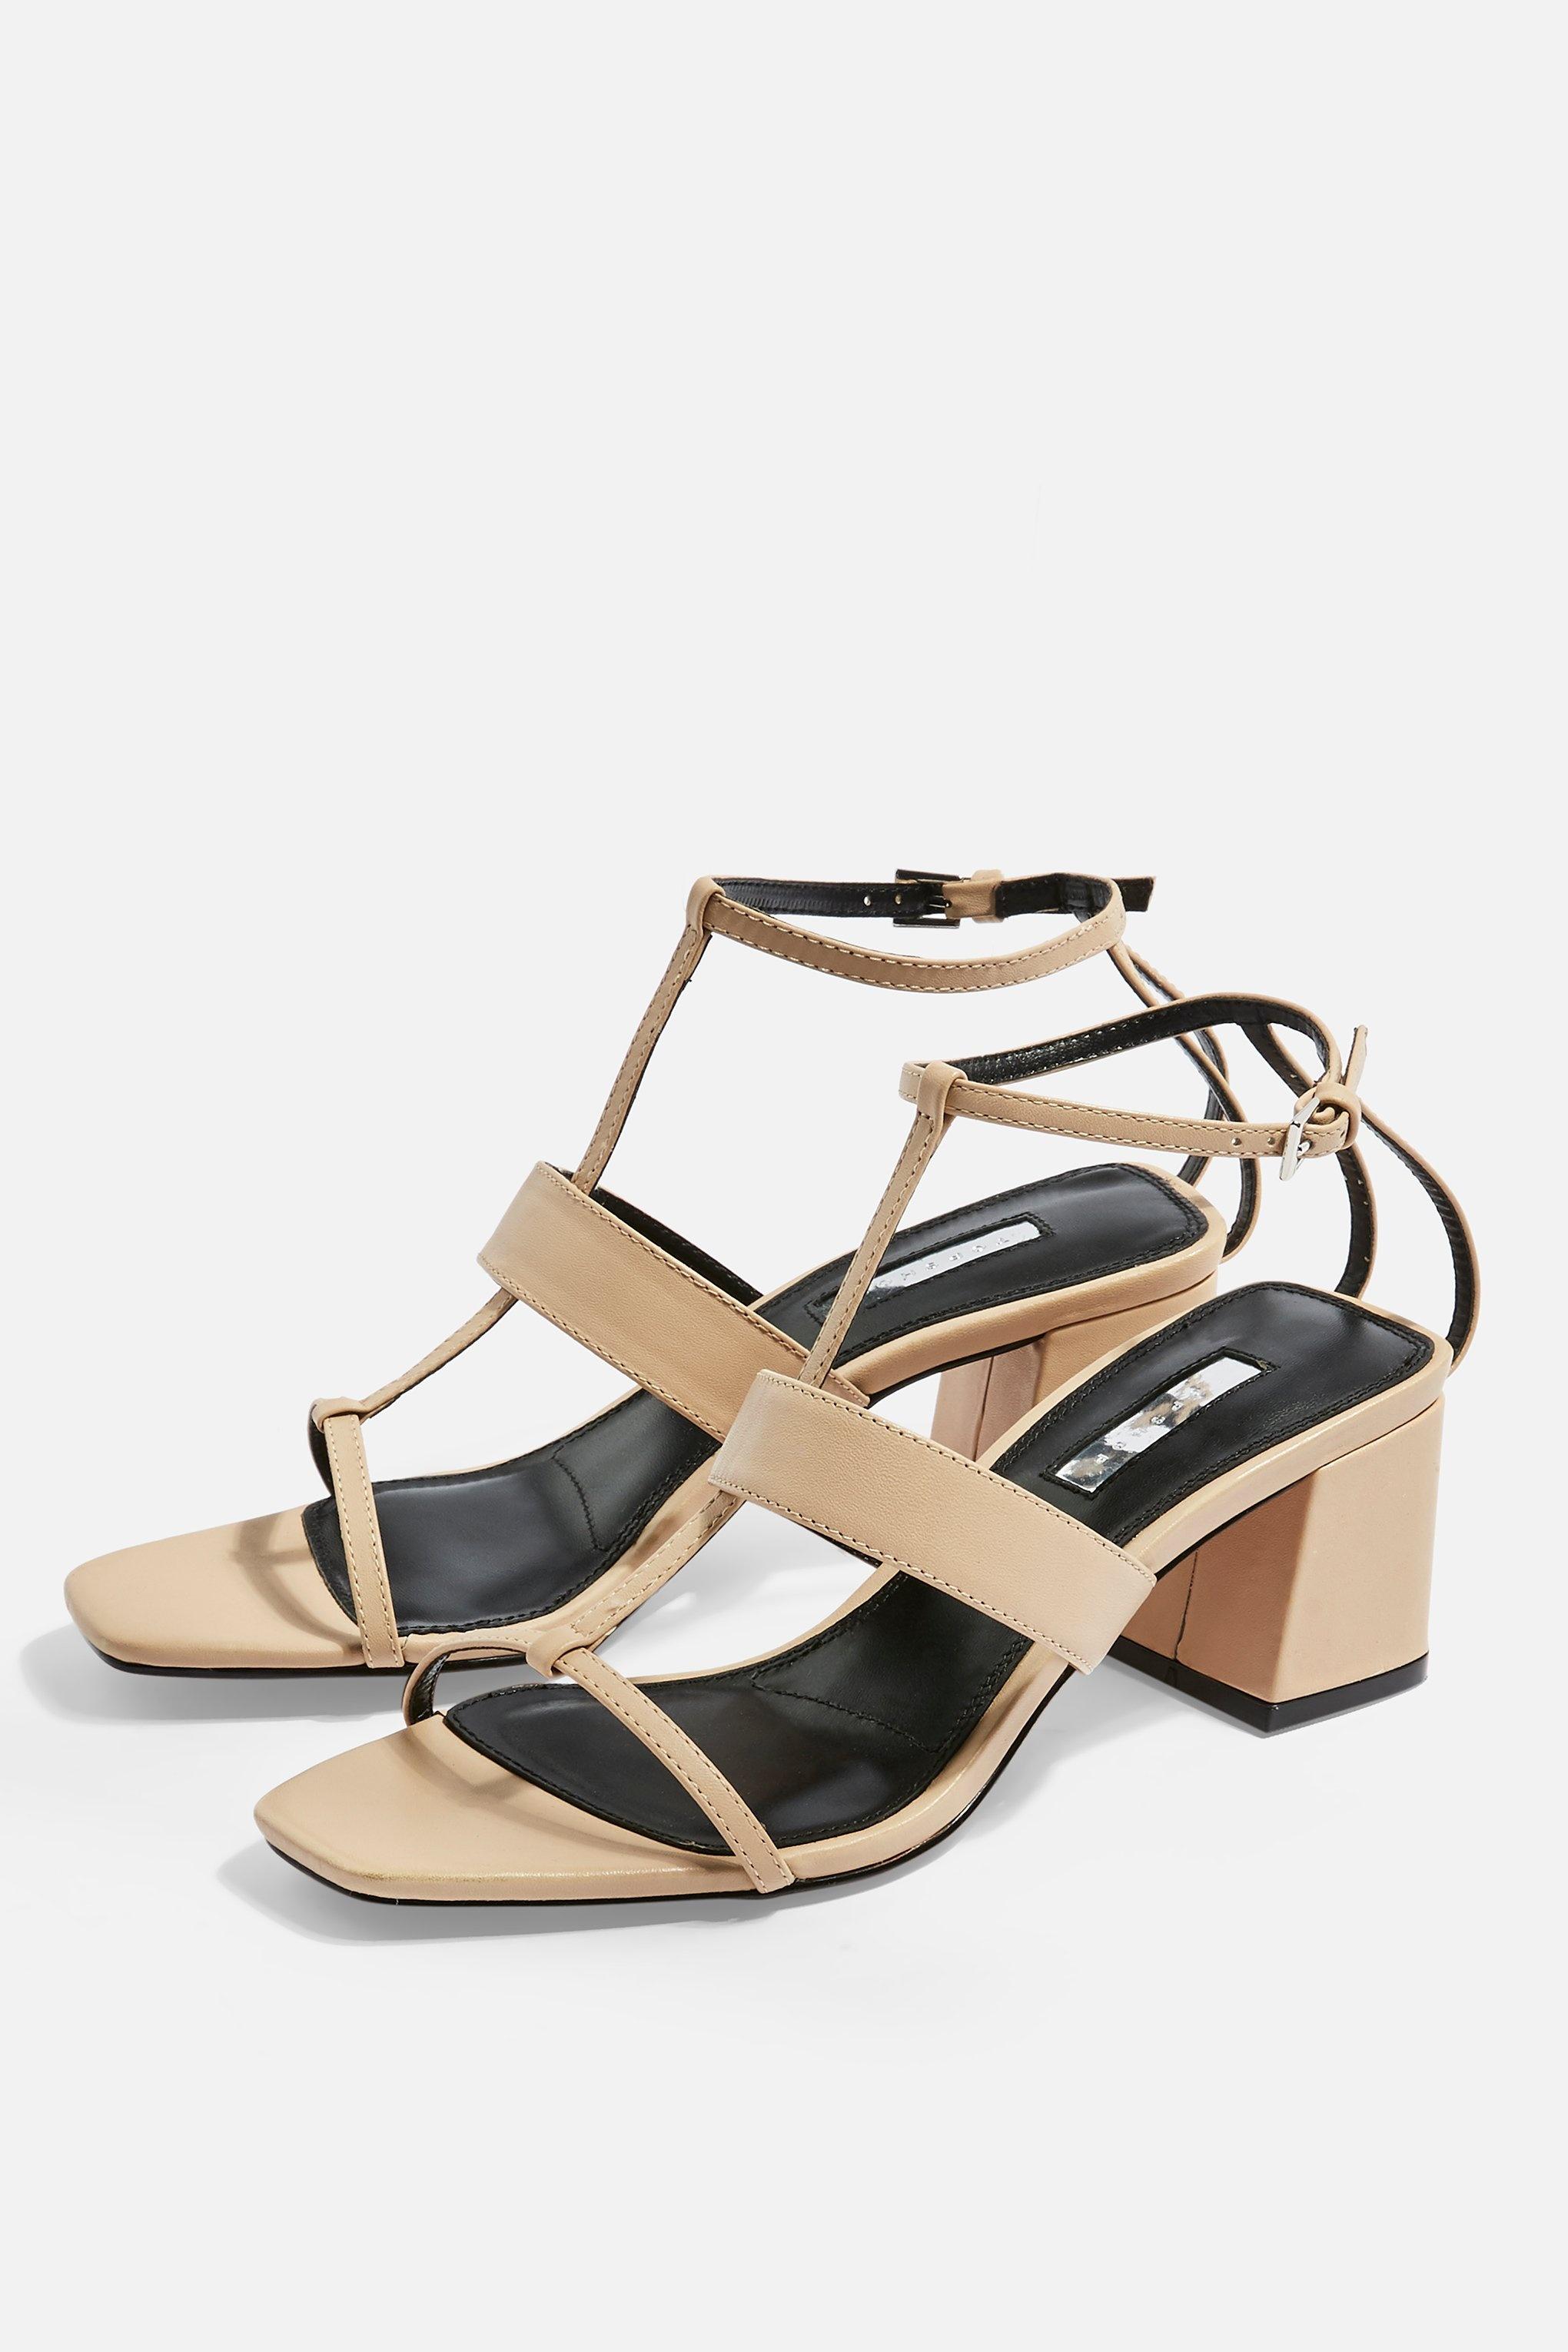 nude t bar sandals